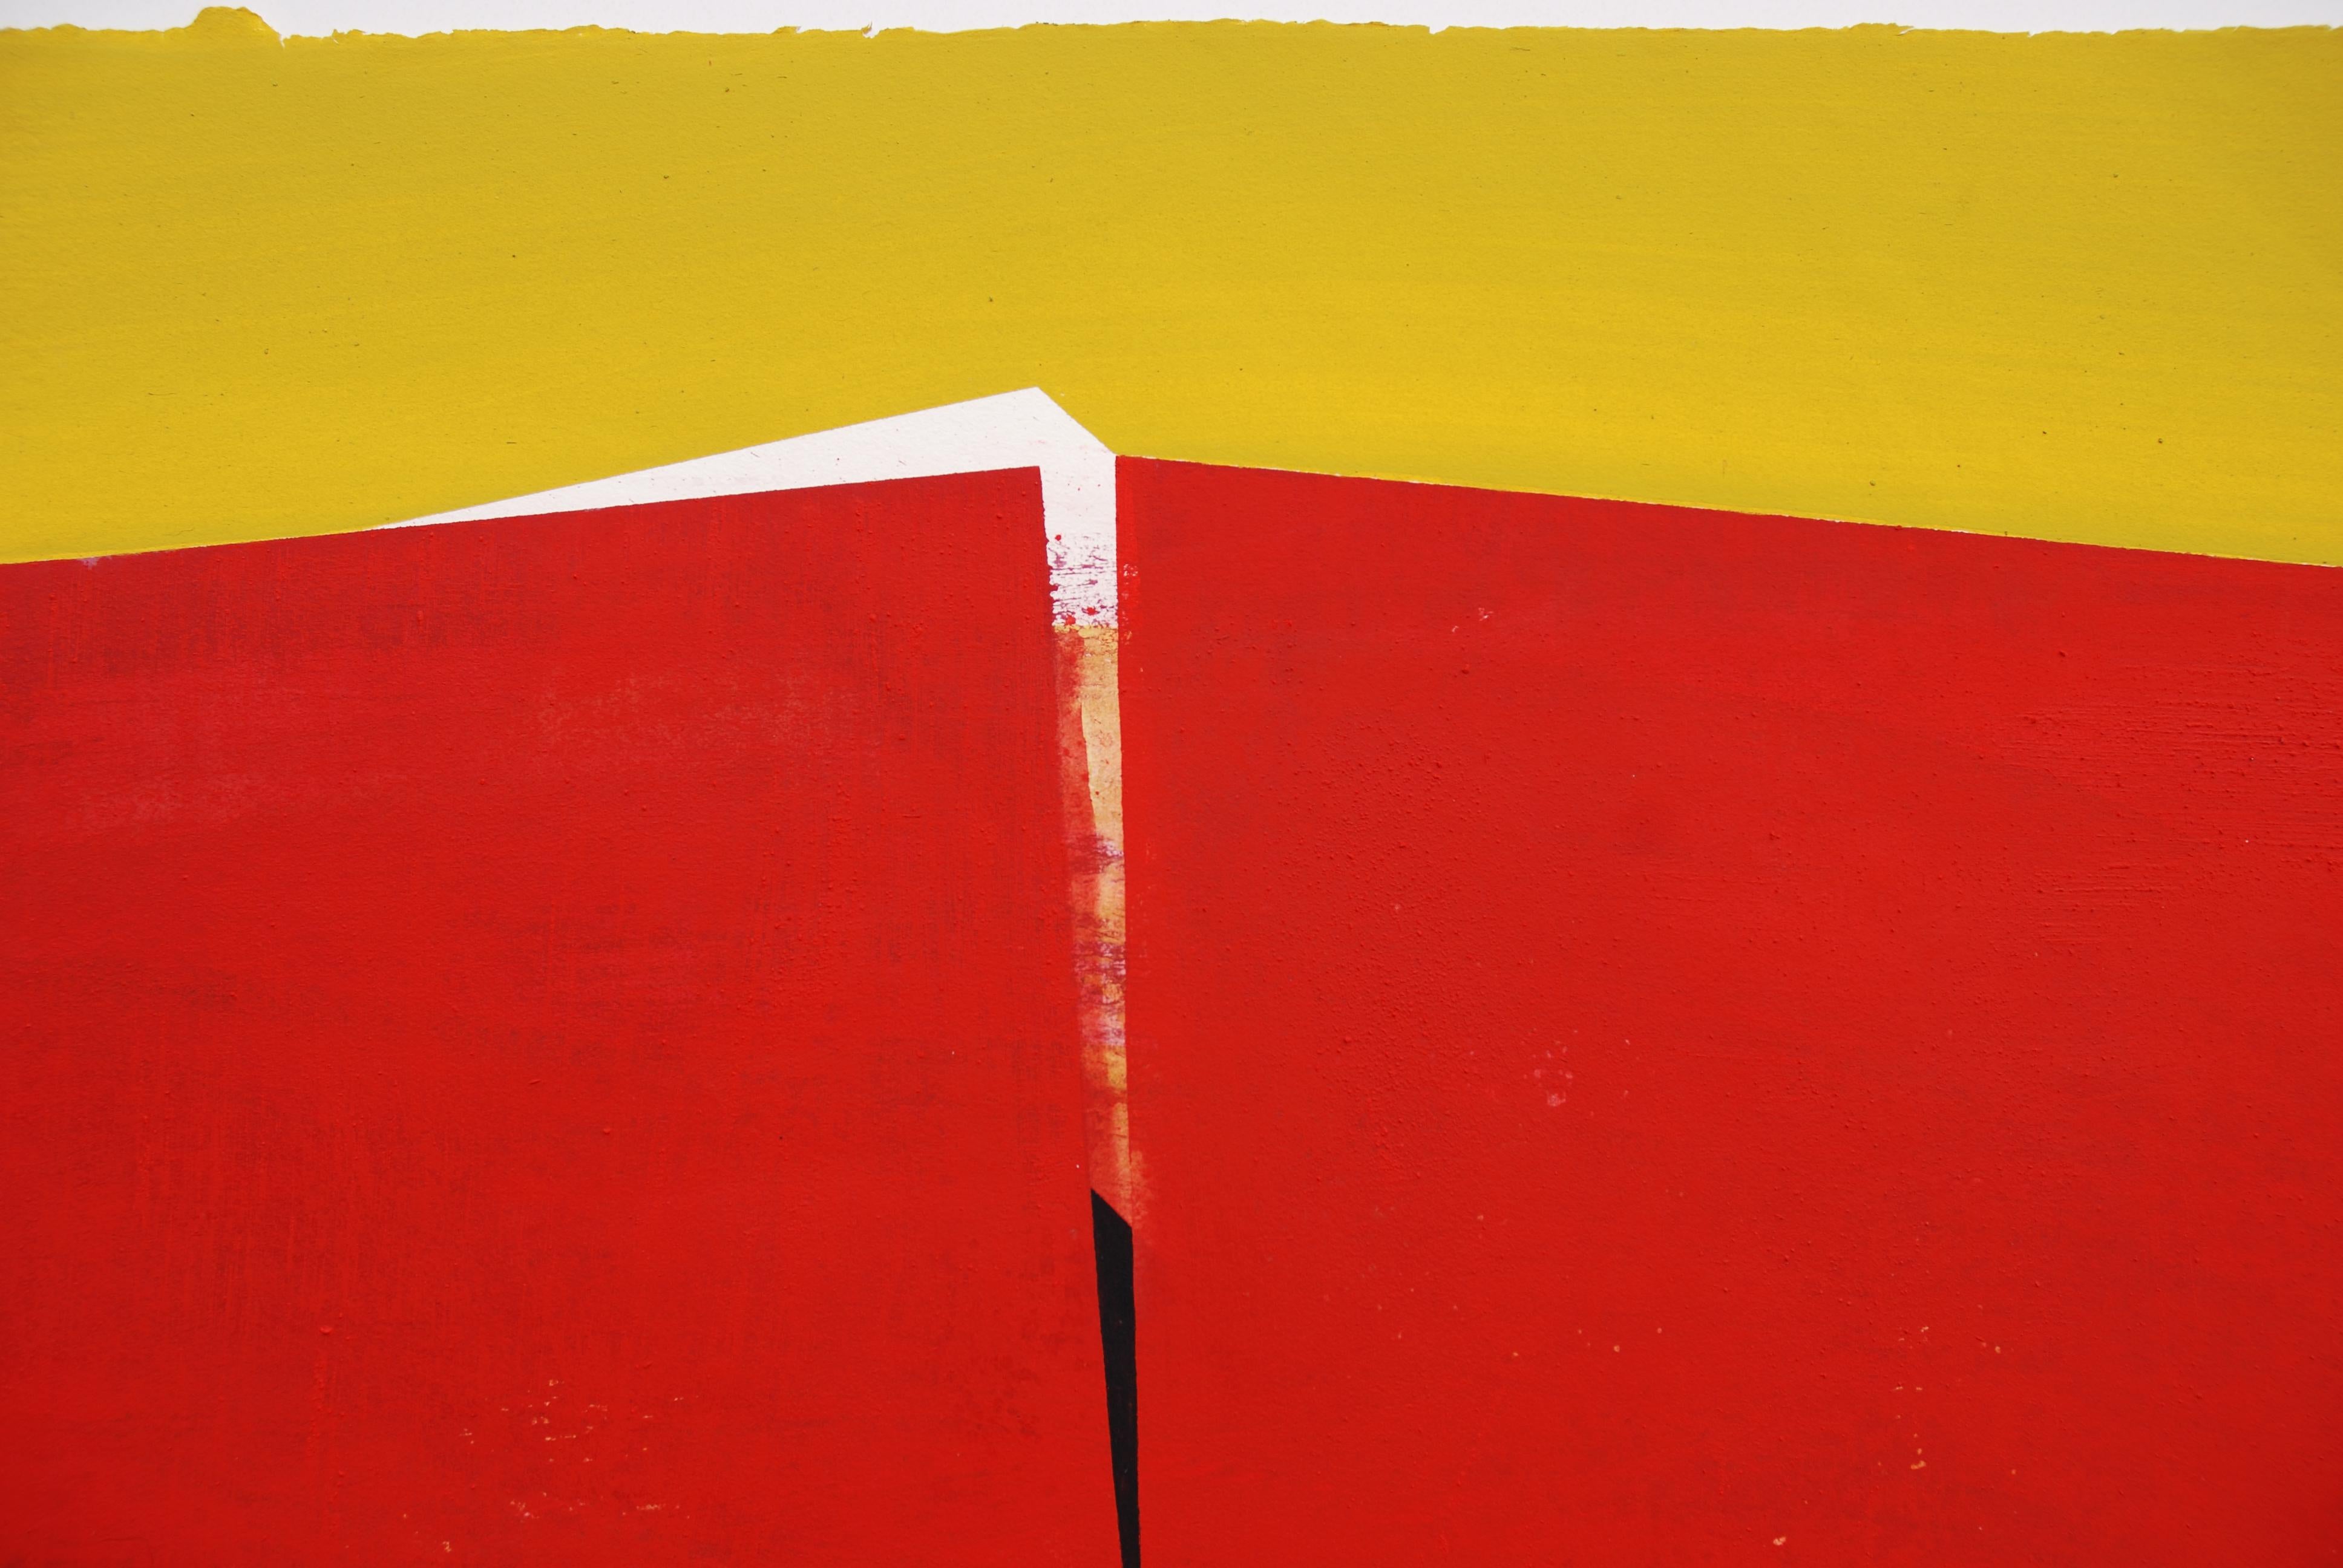 Silvia Lerin, Red Piece Cleaved, 2009, Acrylic on paper, 44 1/10 × 29 9/10 × 2/5 in; 112 × 76 × 1 cm

This is one of a series of large paintings on paper and stem from Silvia’s interest in the relationships between shapes, volumes, colours and